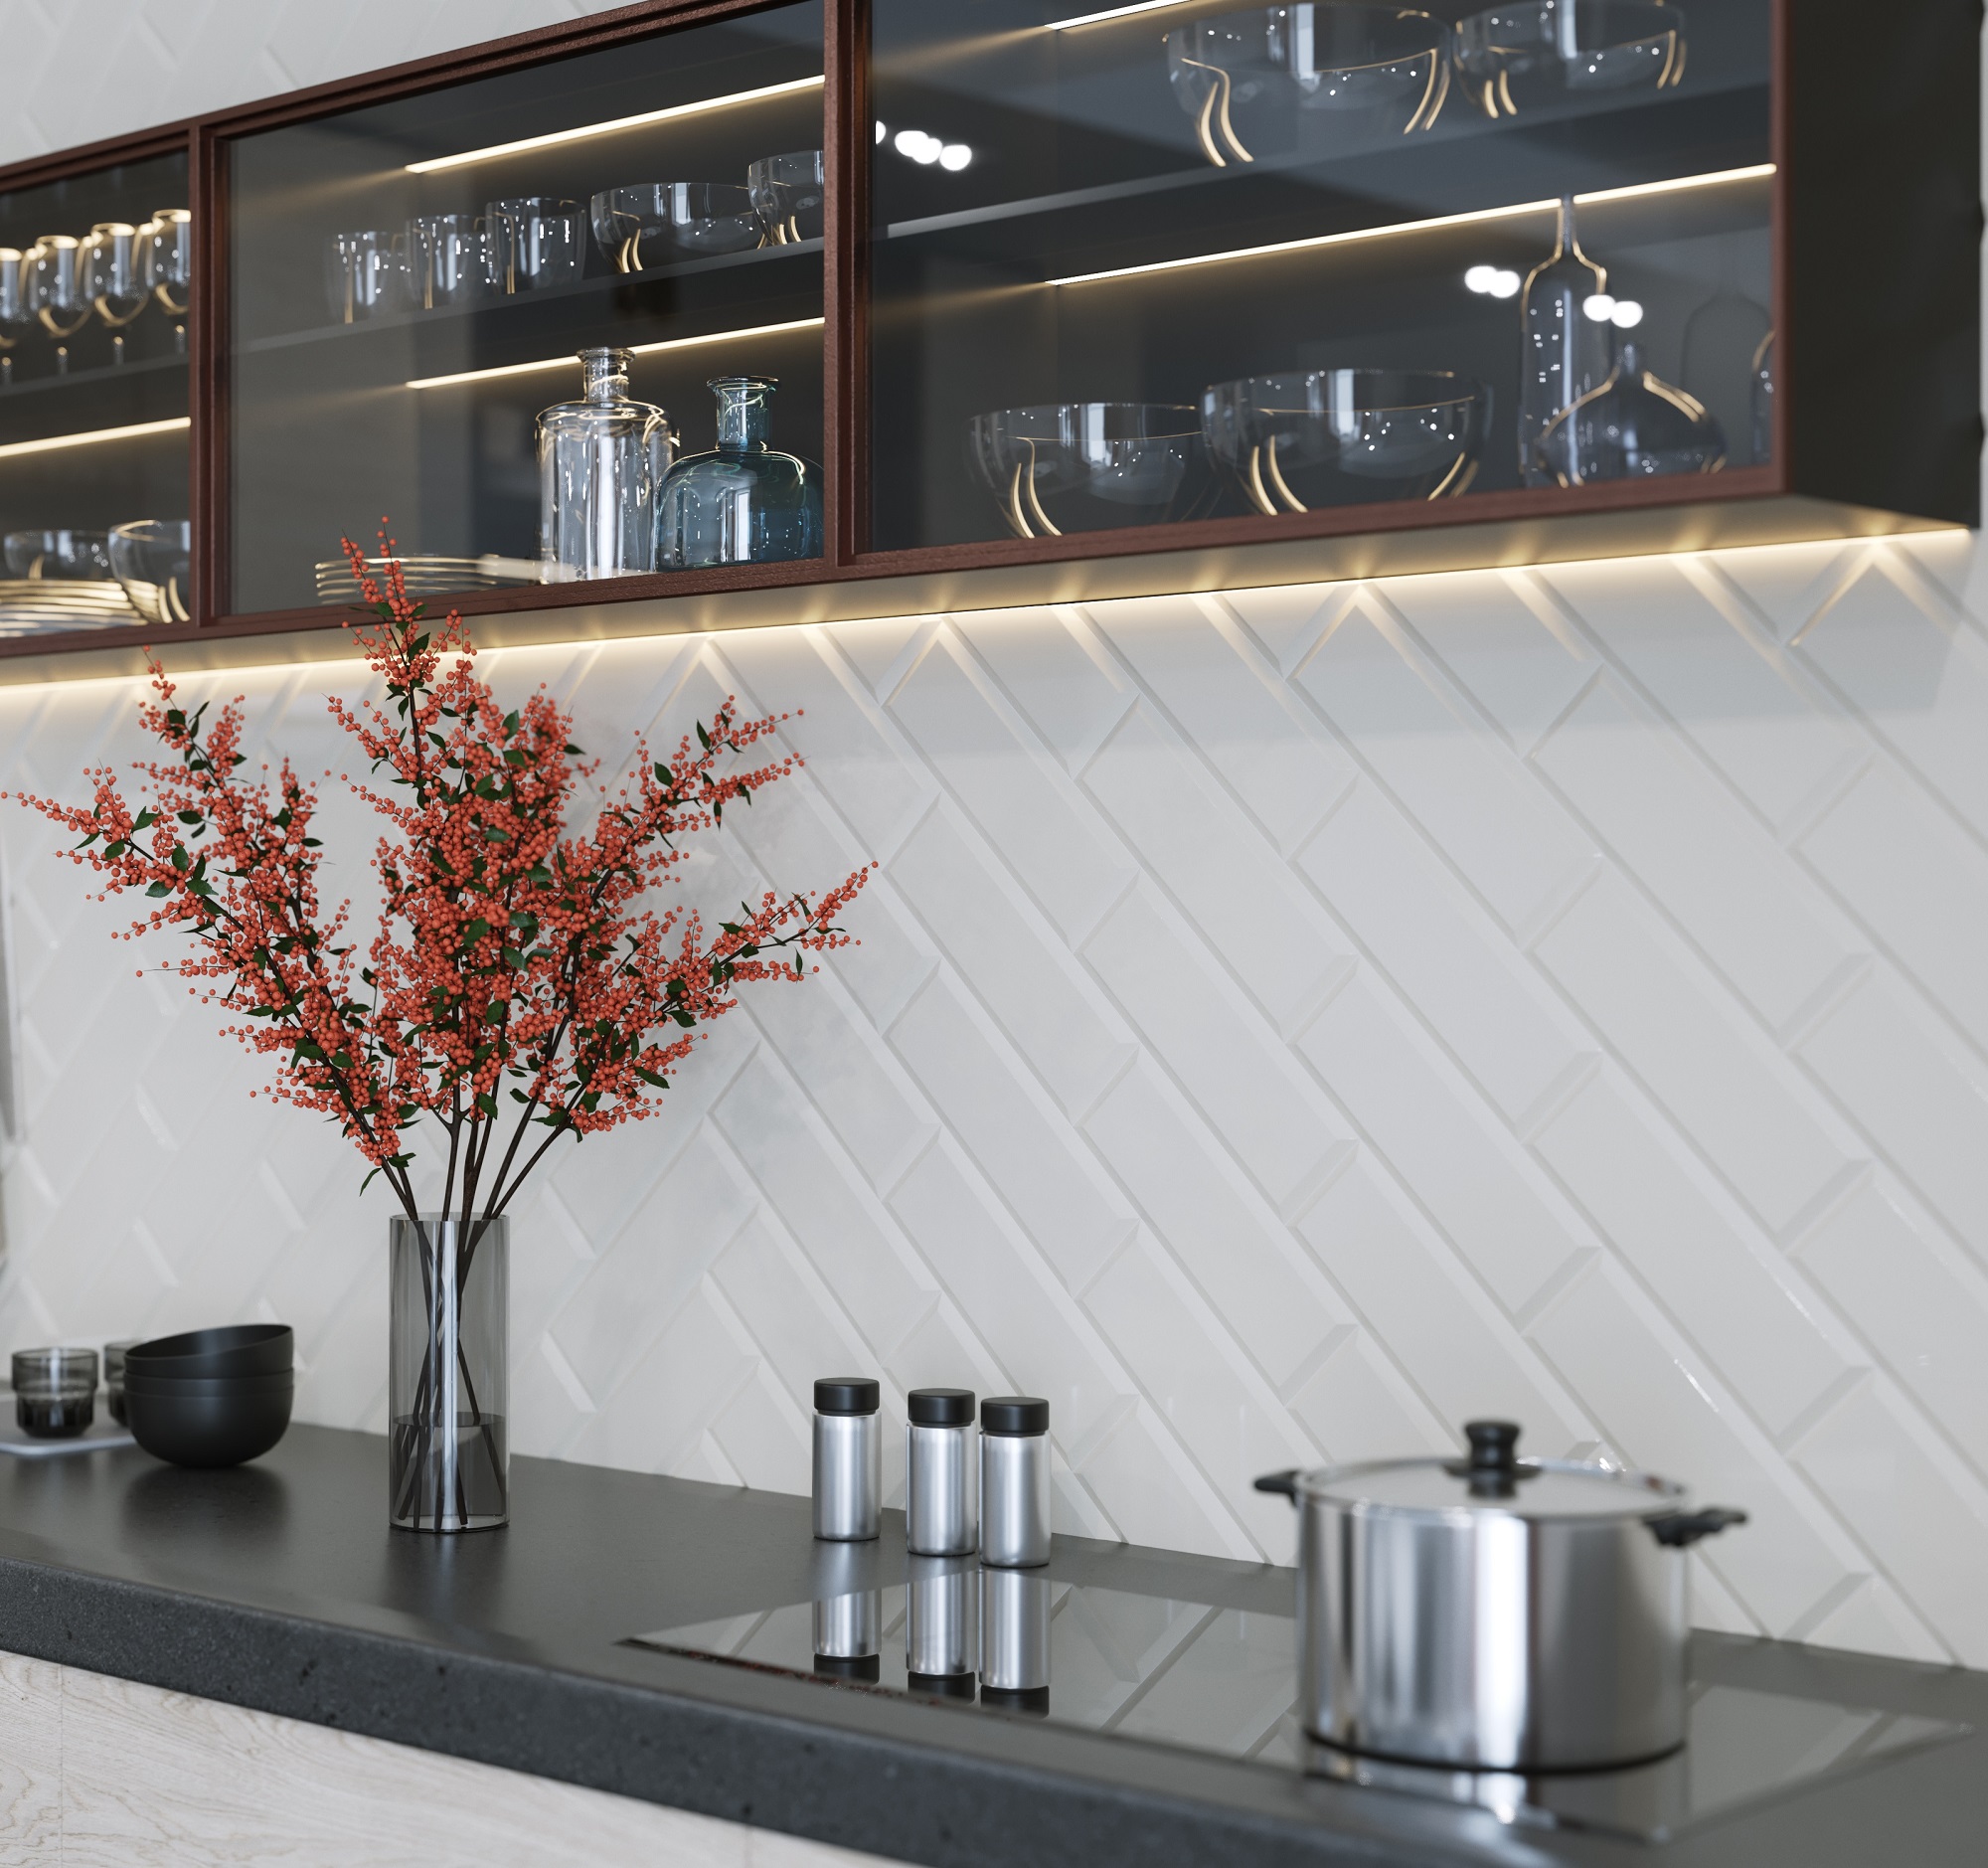 What is the Best Tile for a Kitchen Splashback?